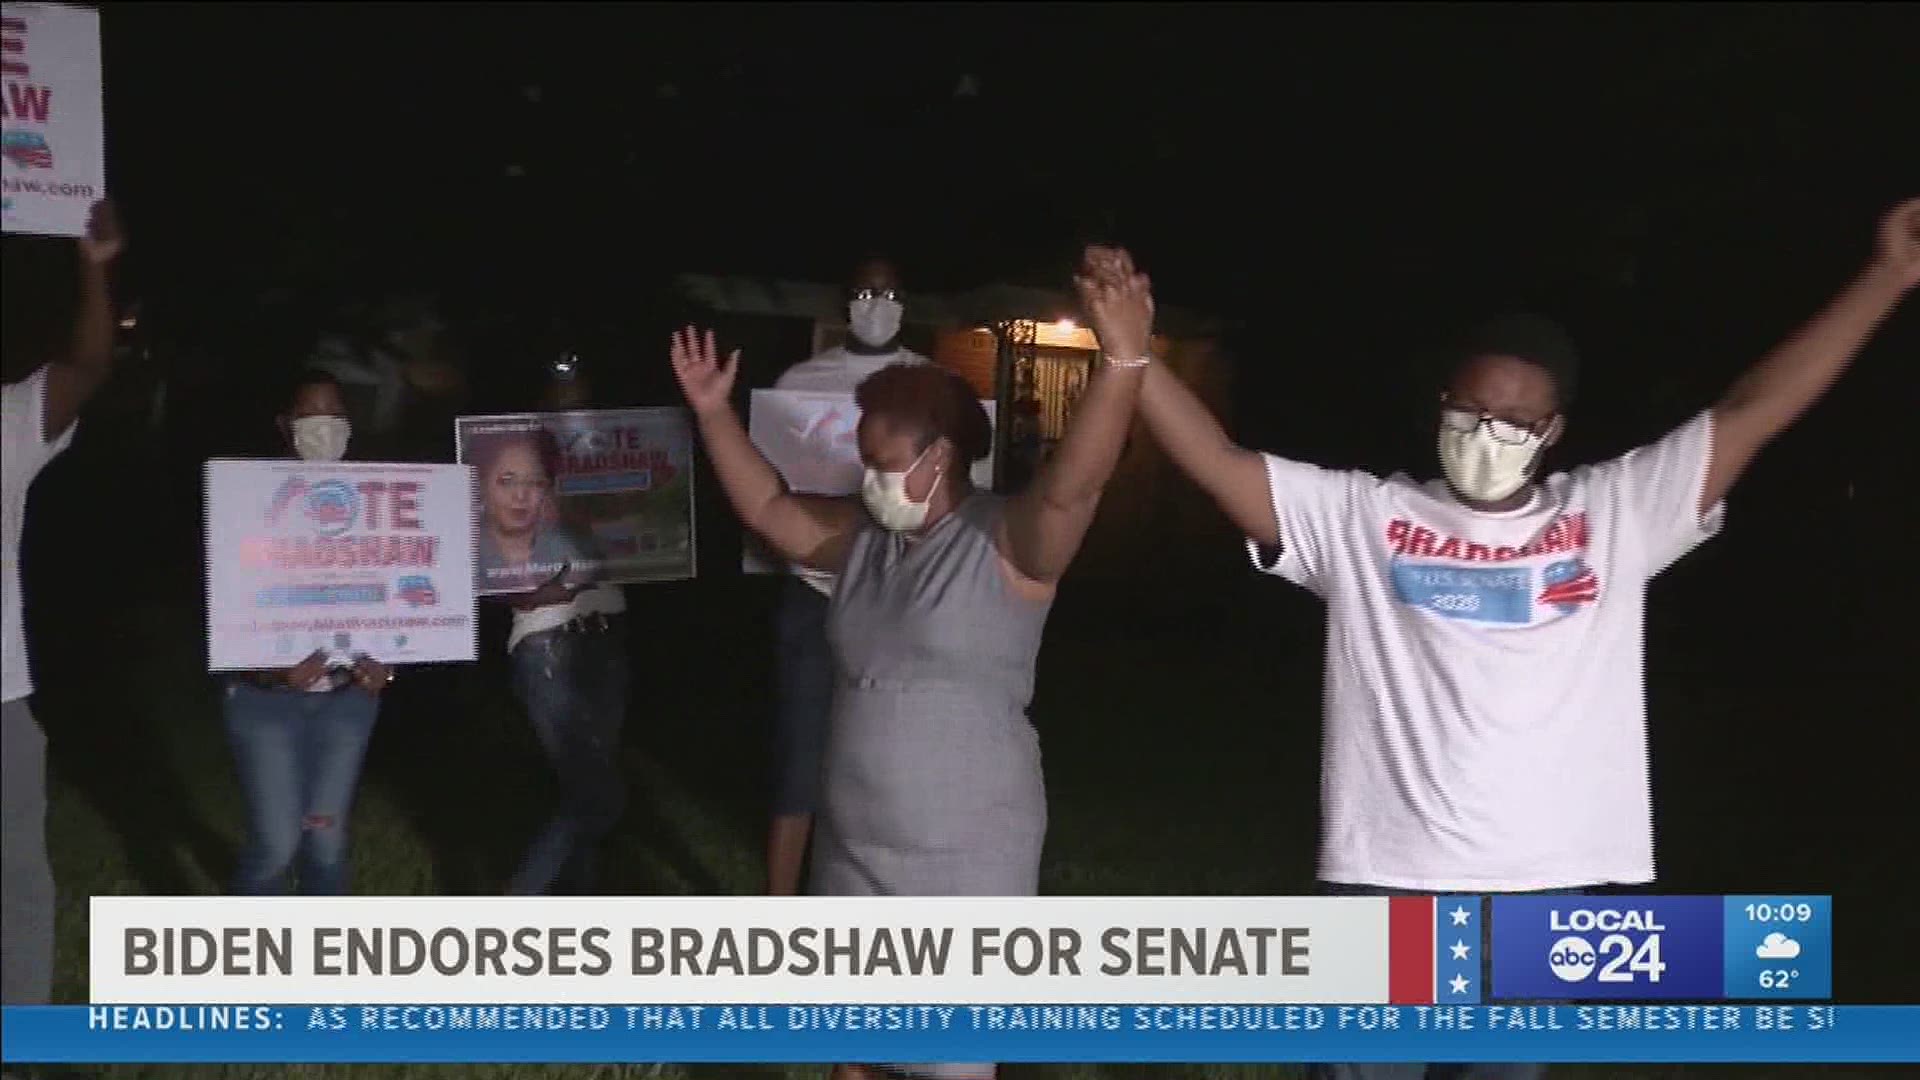 Bradshaw’s grassroots campaign is using a lot of digital tools and outdoor campaigning events to reach the voters in this last week of campaigning.